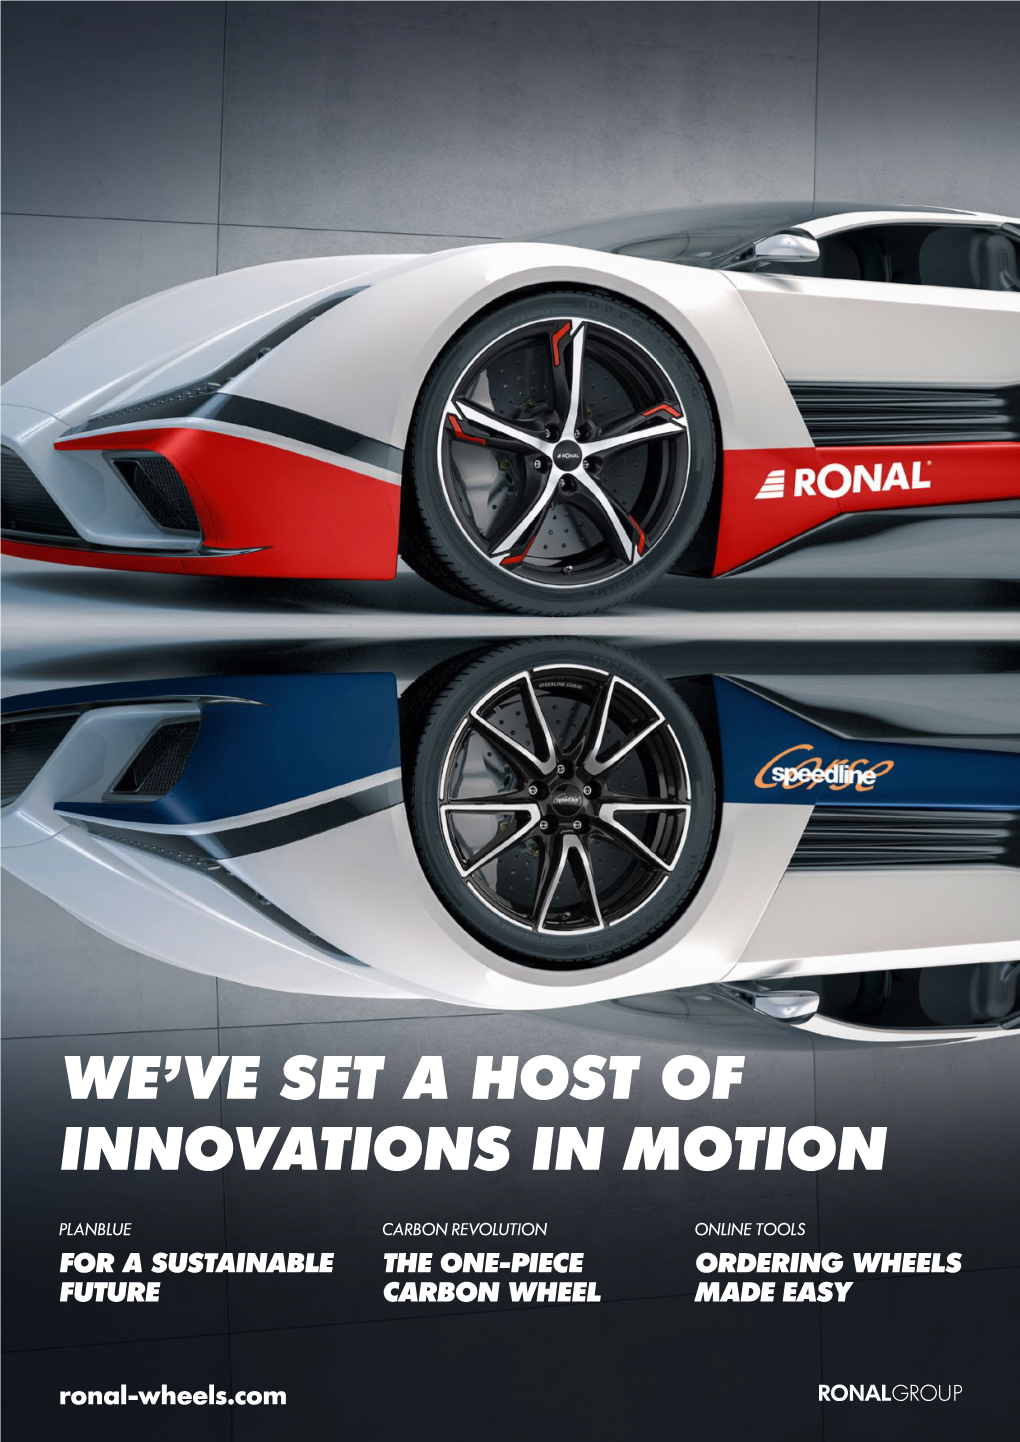 We've Set a Host of Innovations in Motion